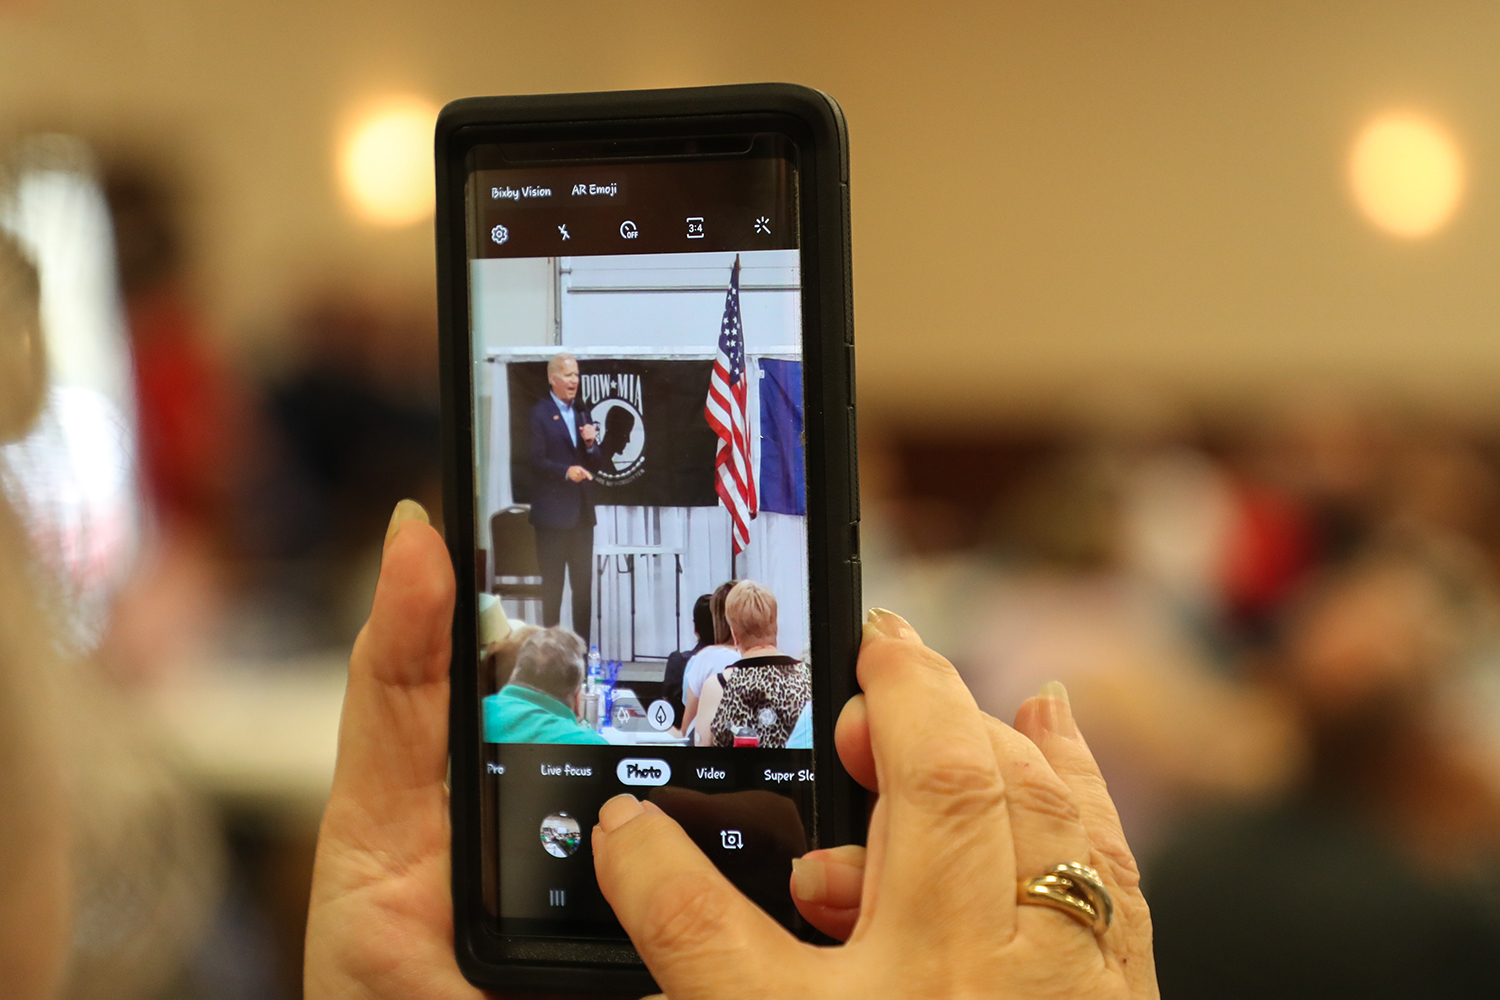  An attendee takes a photo of former Vice President Joe Biden as he speaks at the 1st District Democrats Passport to Victory rally at the Linn County Fairgrounds on Saturday, Aug. 10, 2019.  